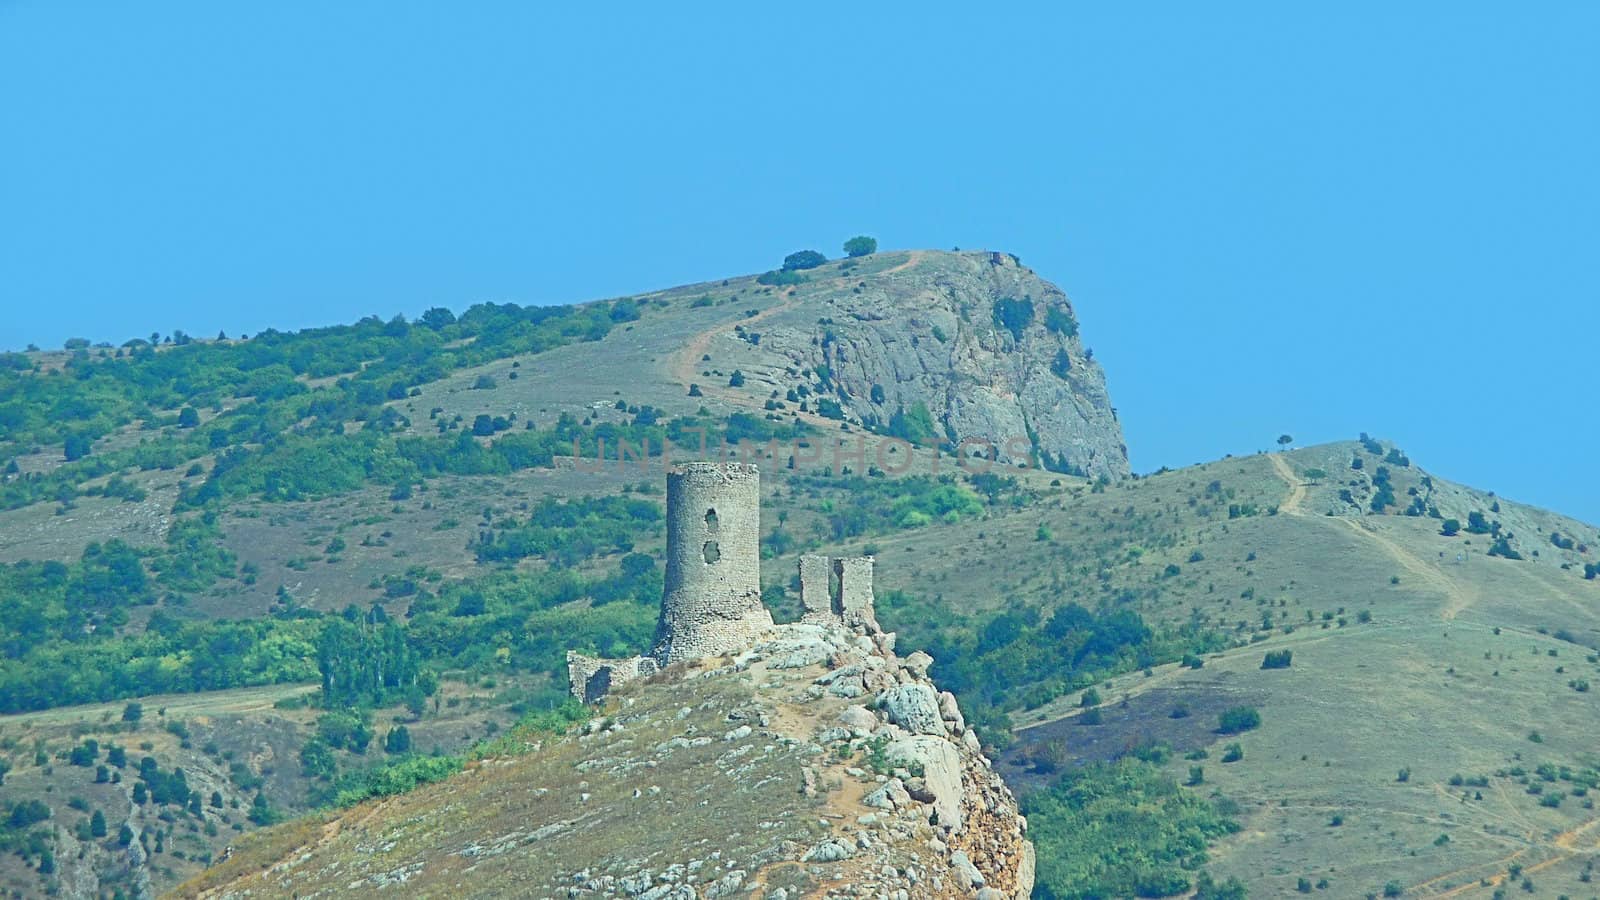 Tower of old fortress on a mountain above a city Balaklava